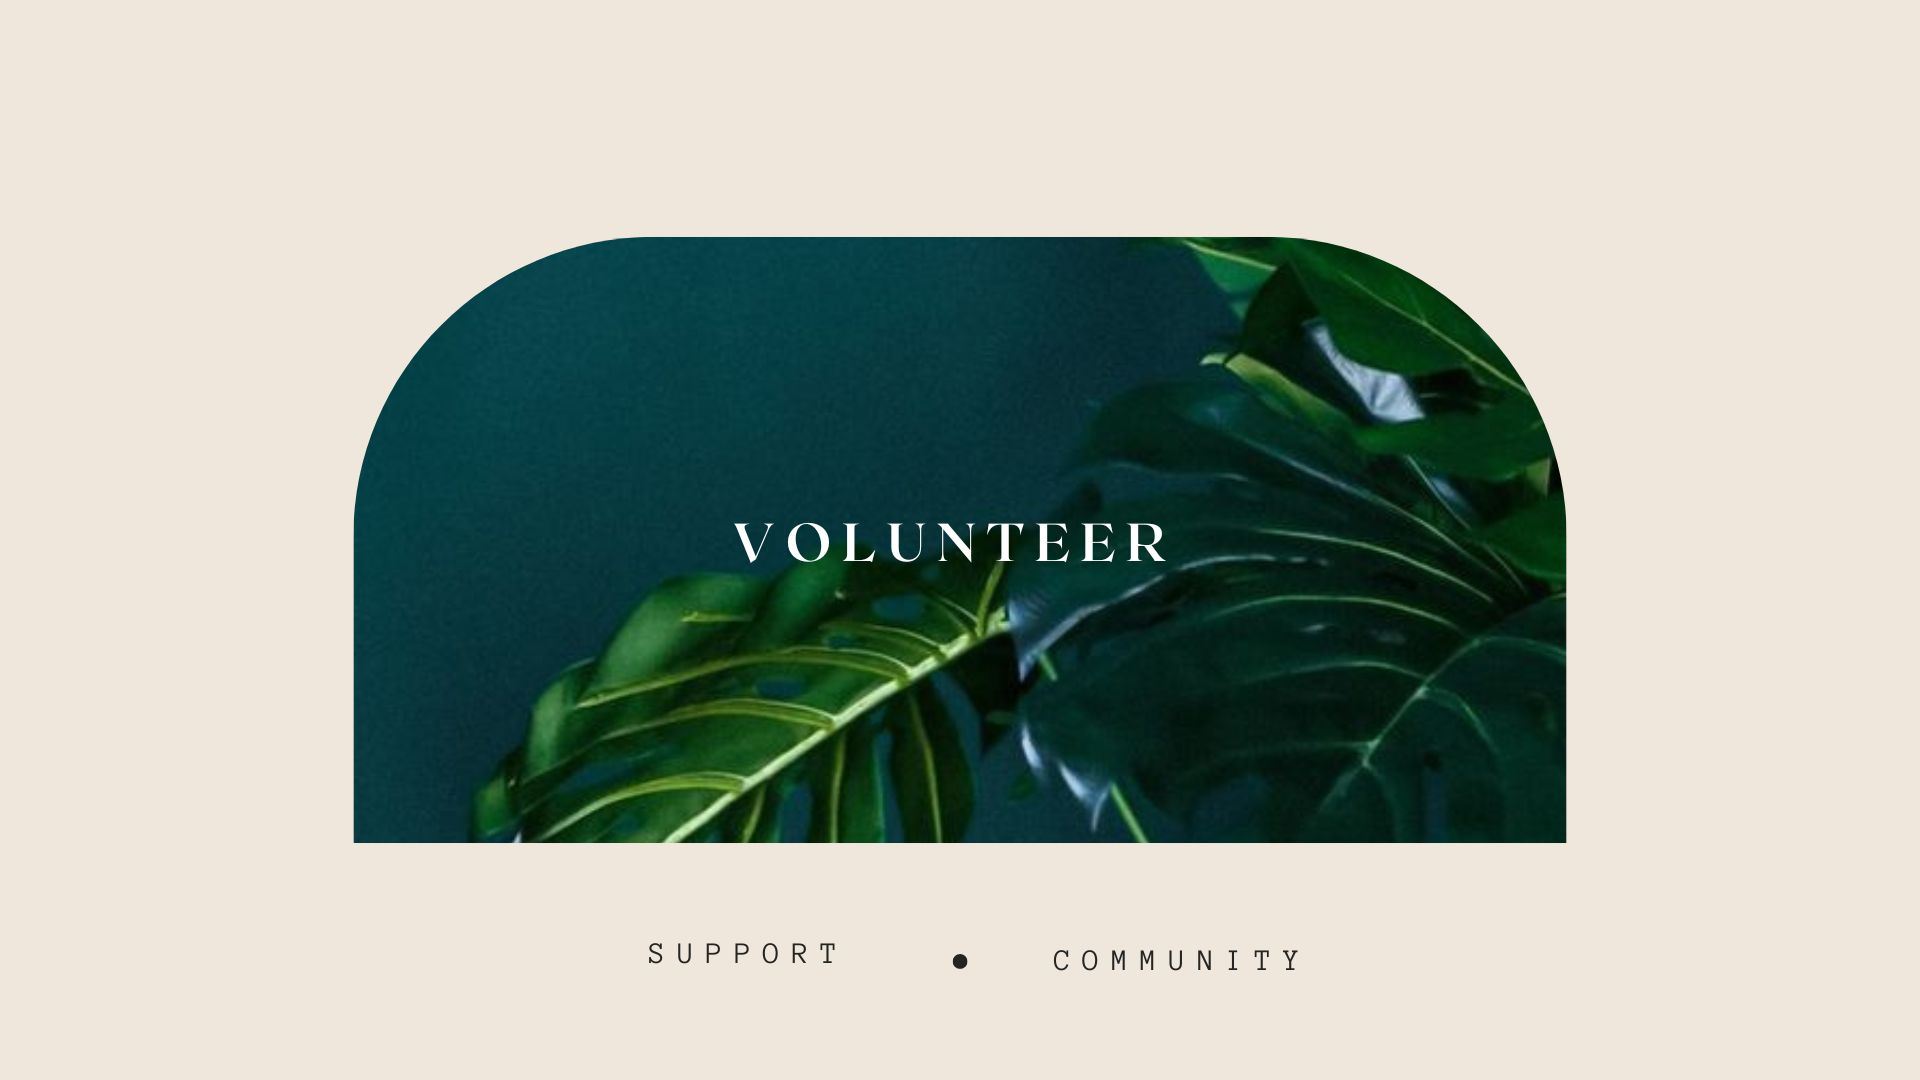 Volunteer.  Support. community.  Image of plants against green wall.